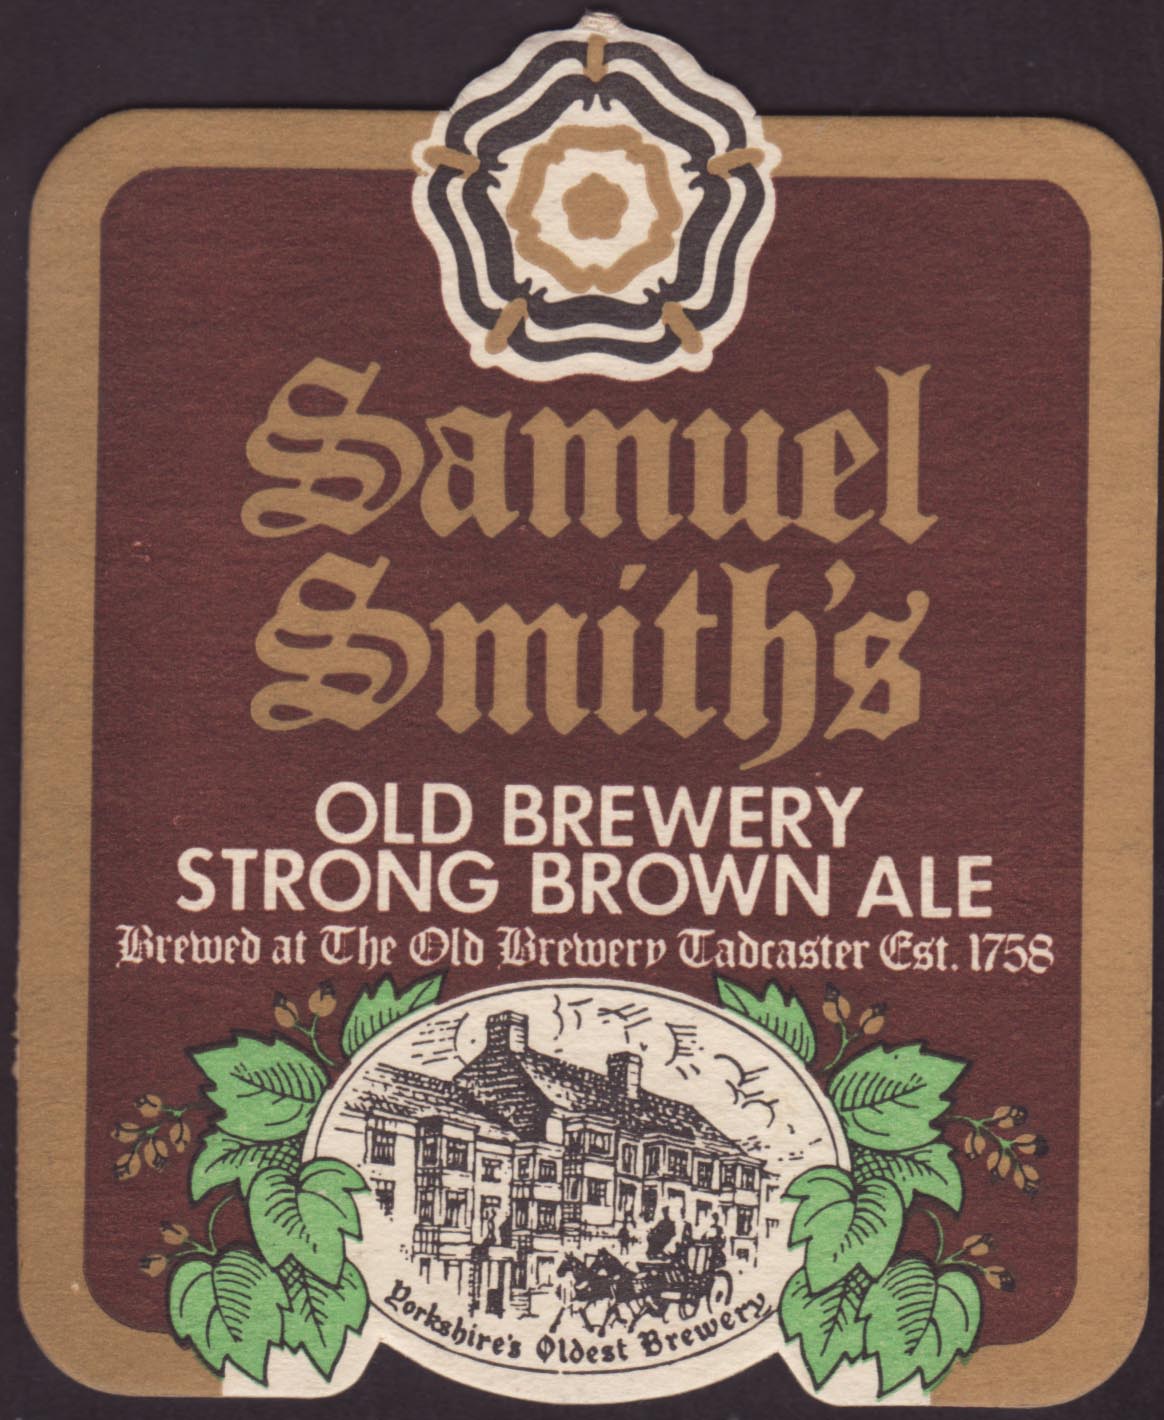 Beer Coaster Coaster Number 2 15 Brewery Samuel Smith City